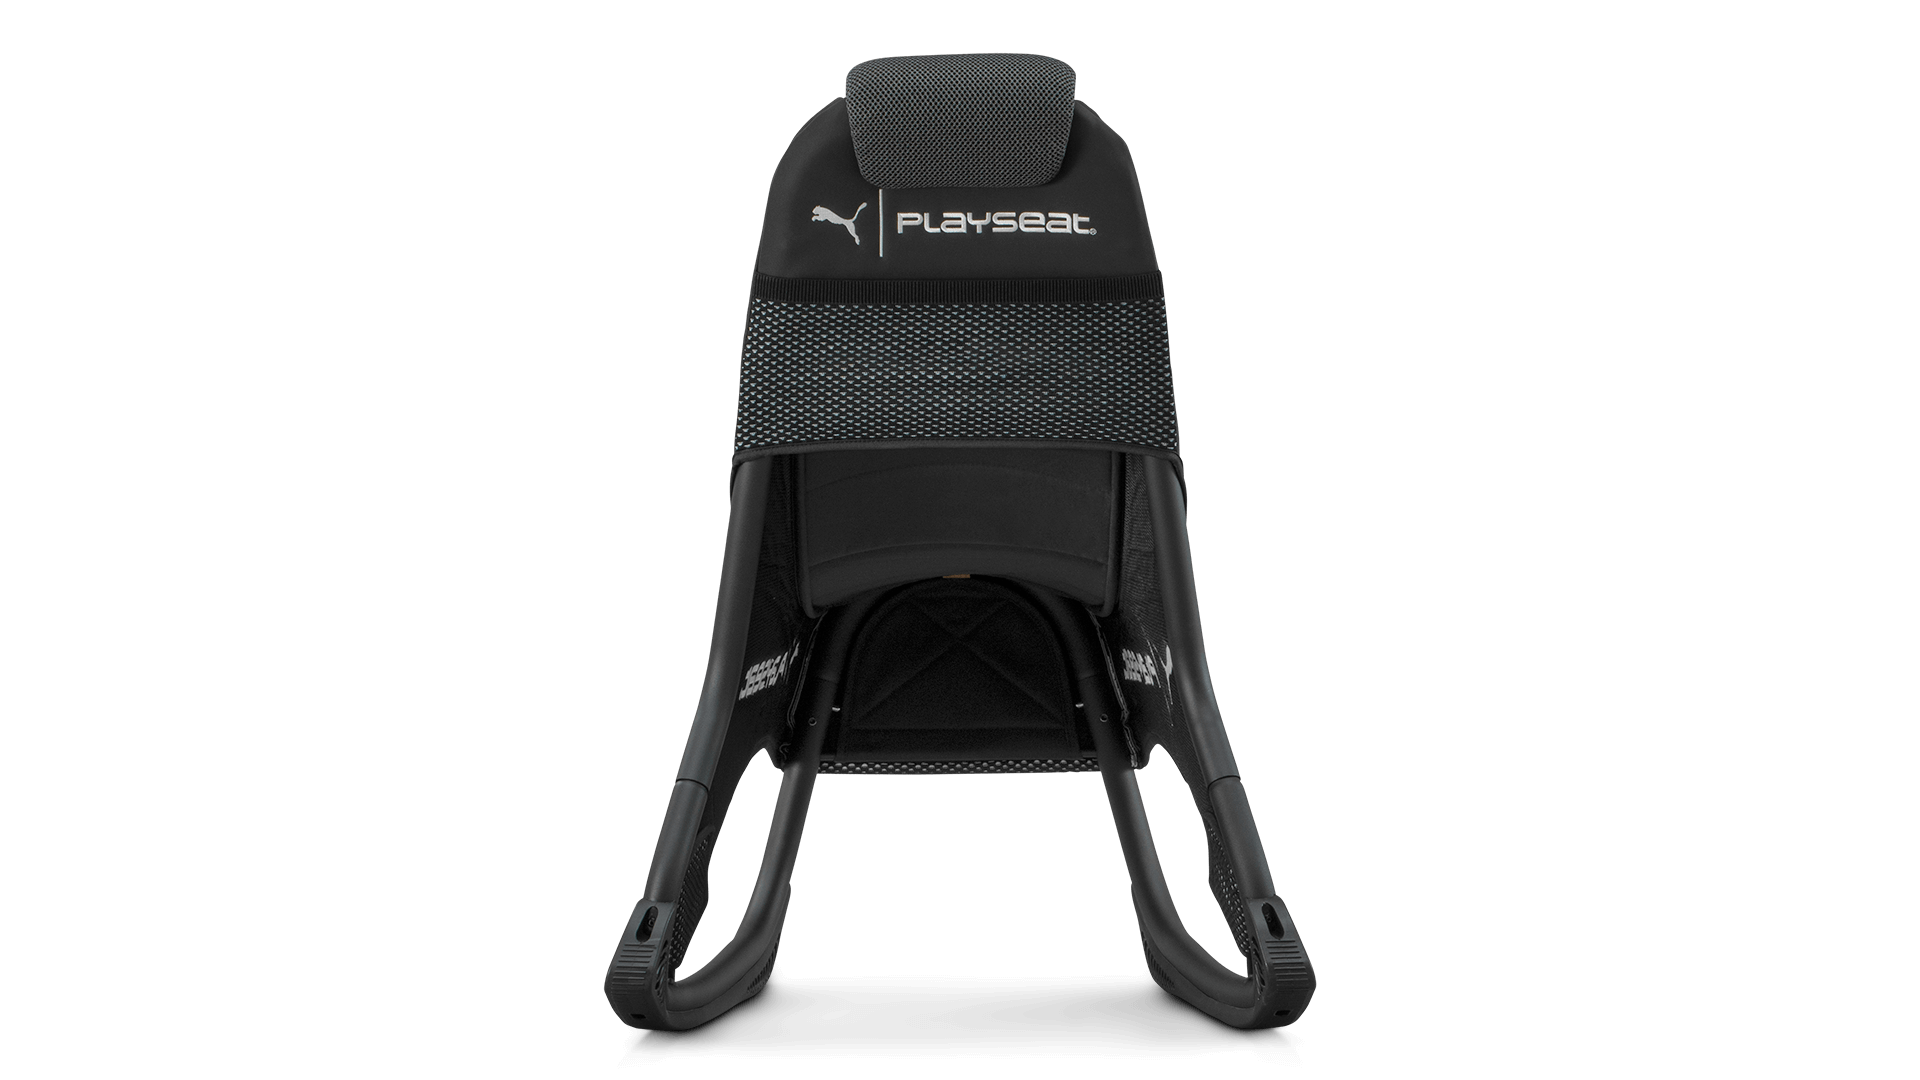 playseat-go-puma-active-black-gaming-seat-back-view-1920x1080-1.png